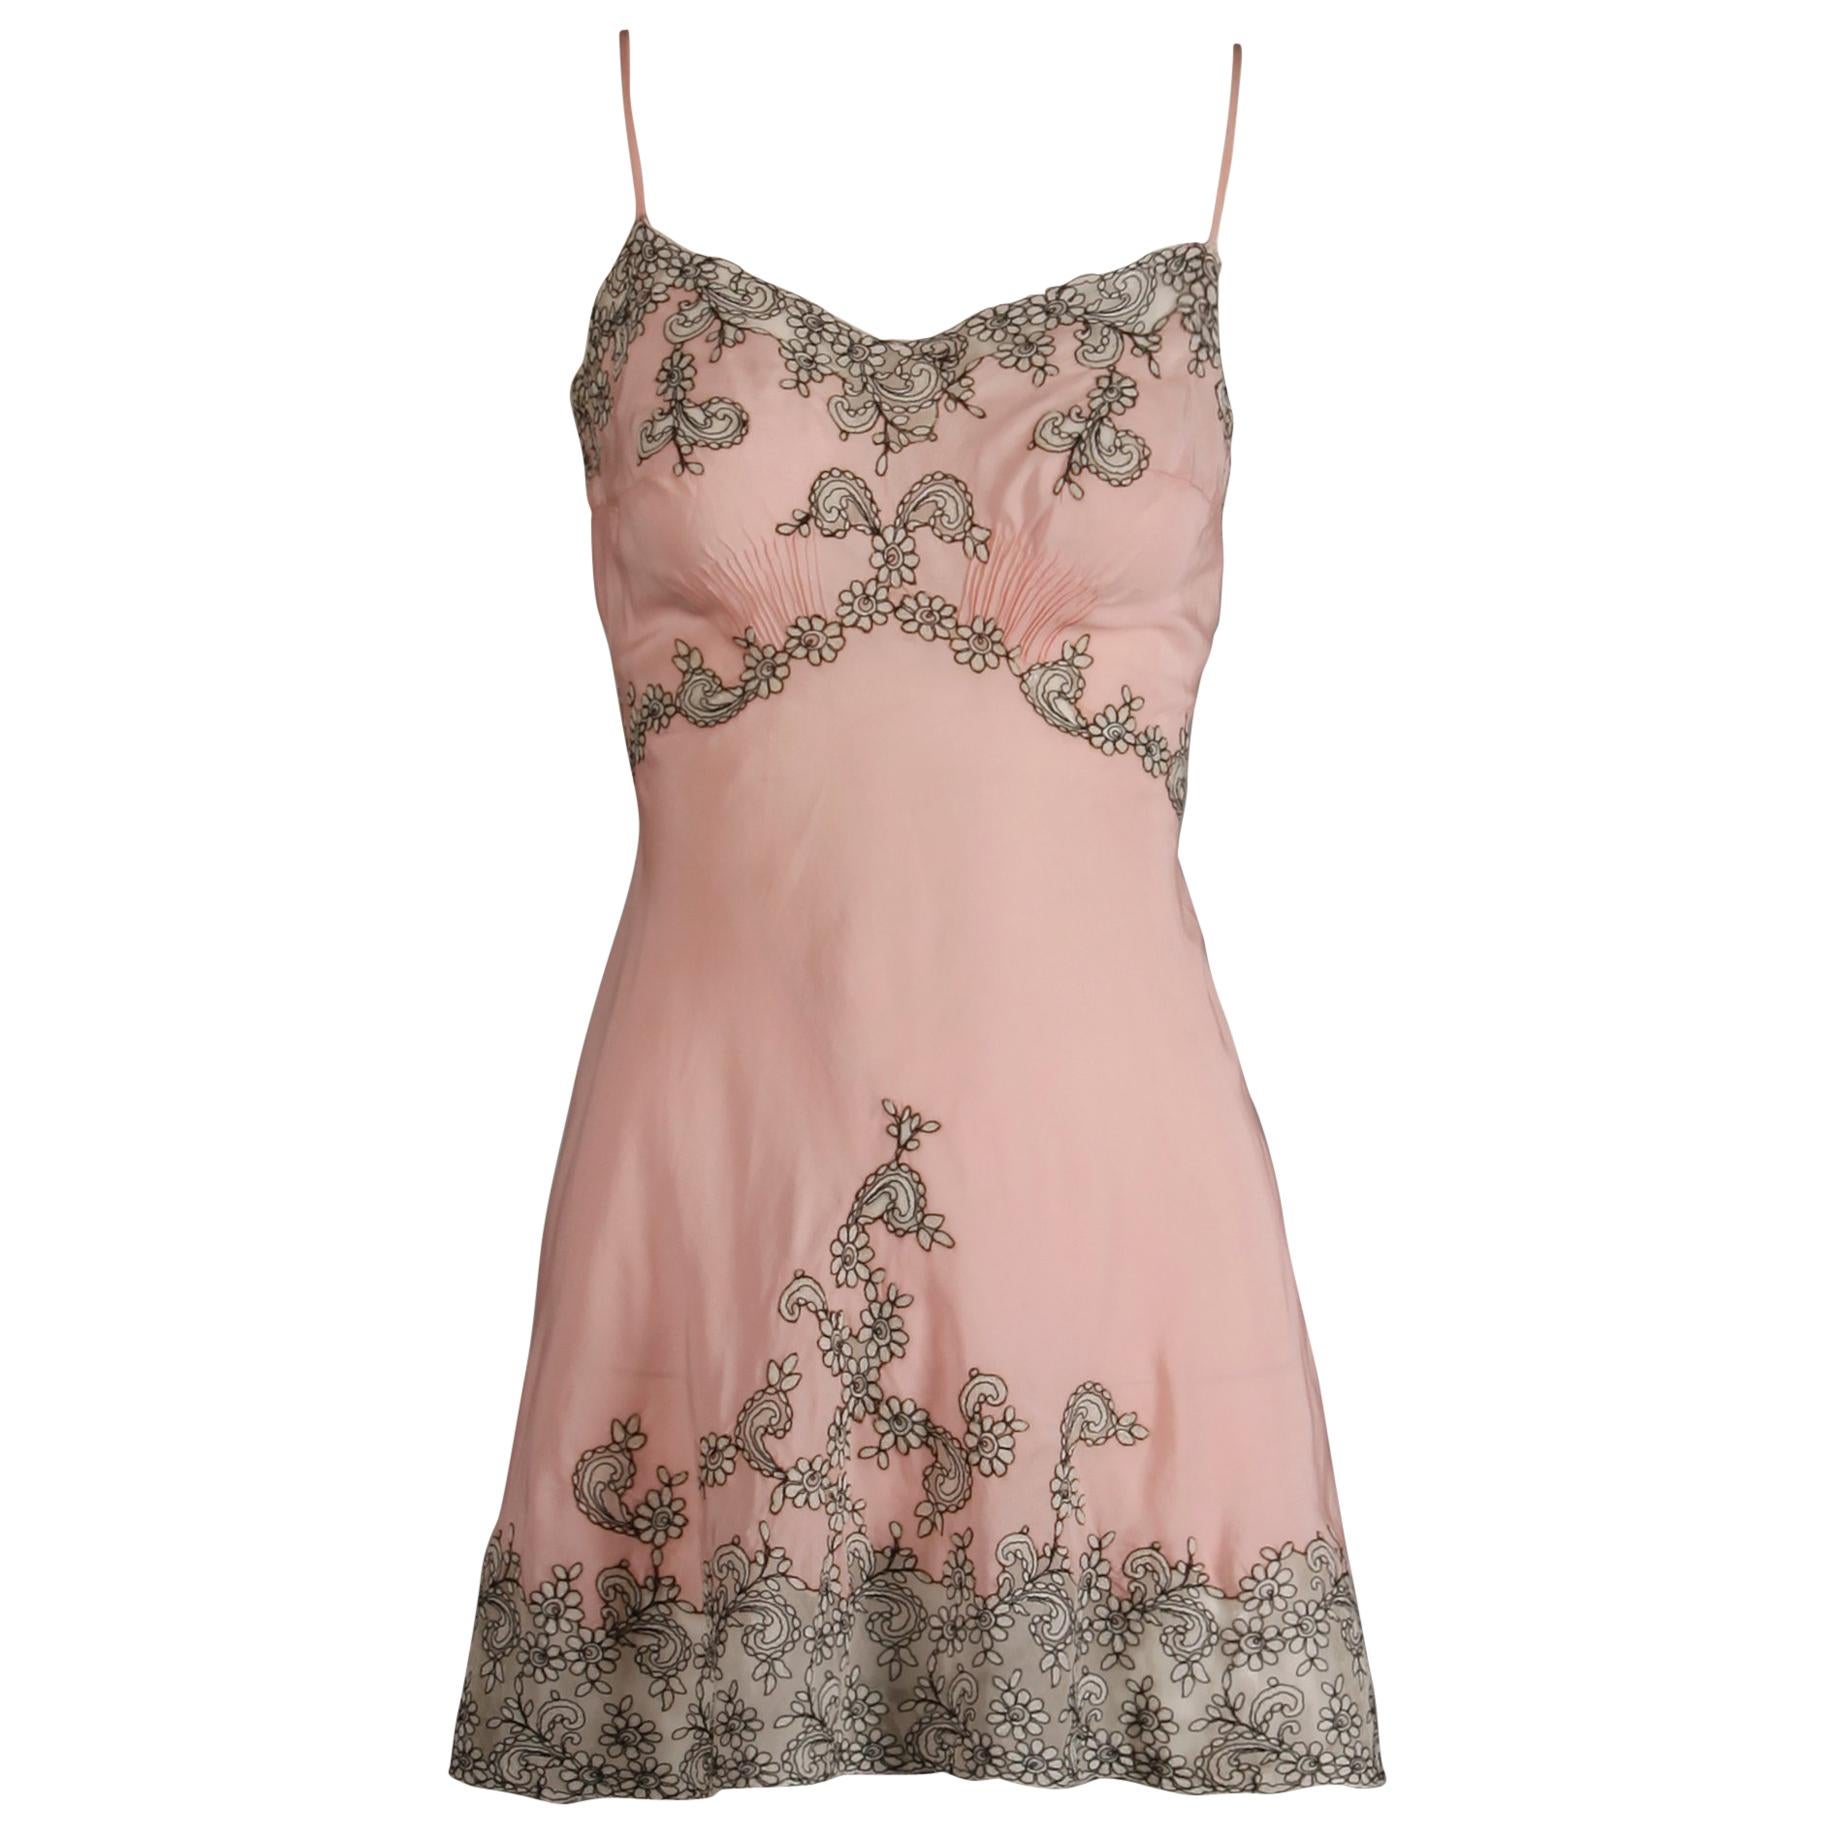 Exceptional 1930s Vintage Embroidered Pink Silk Lingerie (Slip Dress/ Negligee)